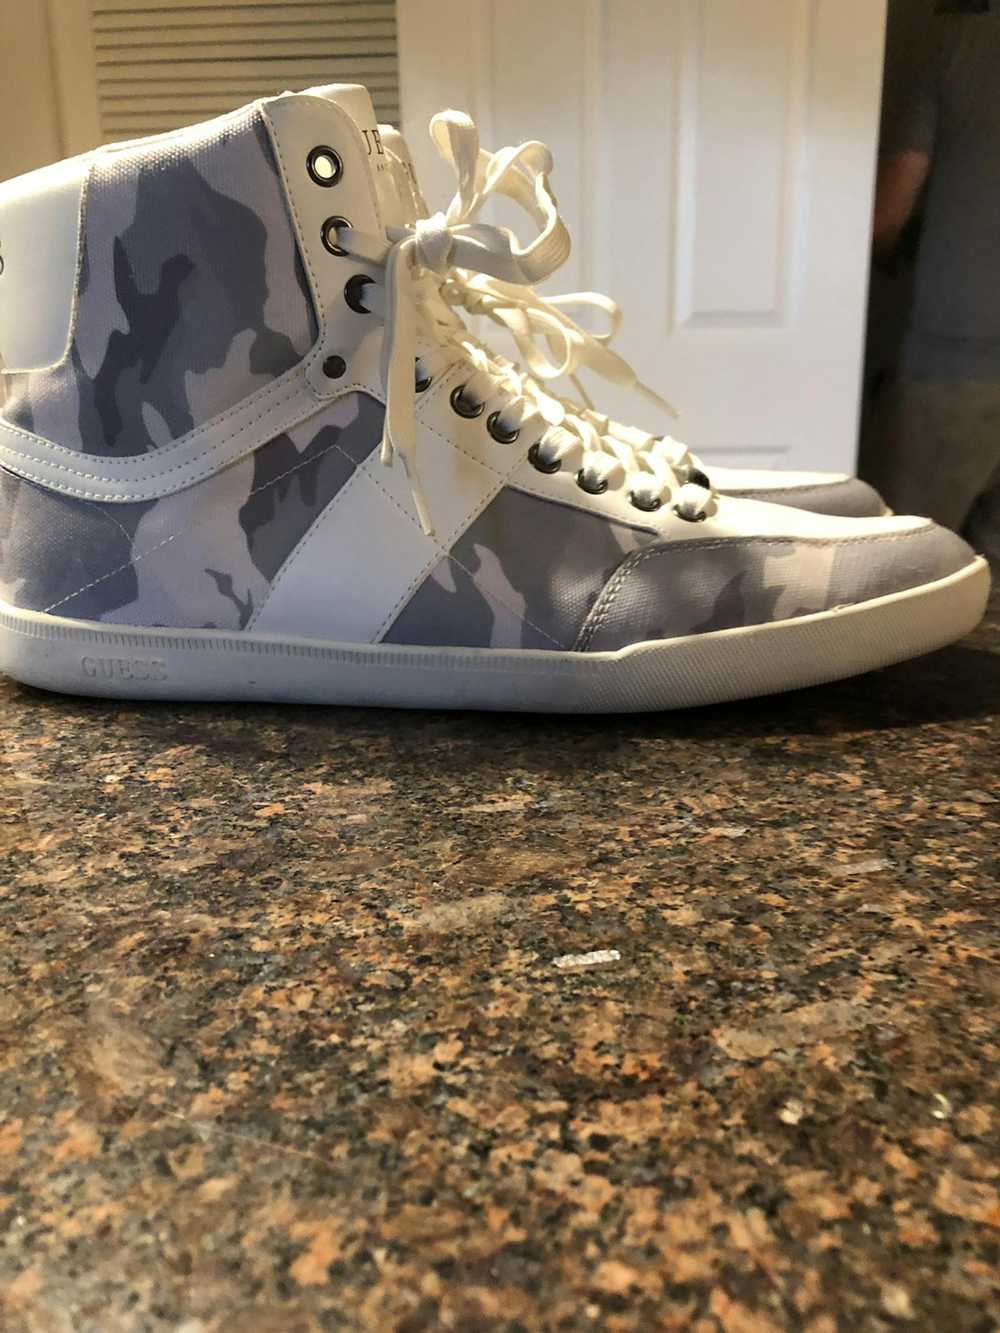 Guess Guess high top shoe very clean light use - image 6